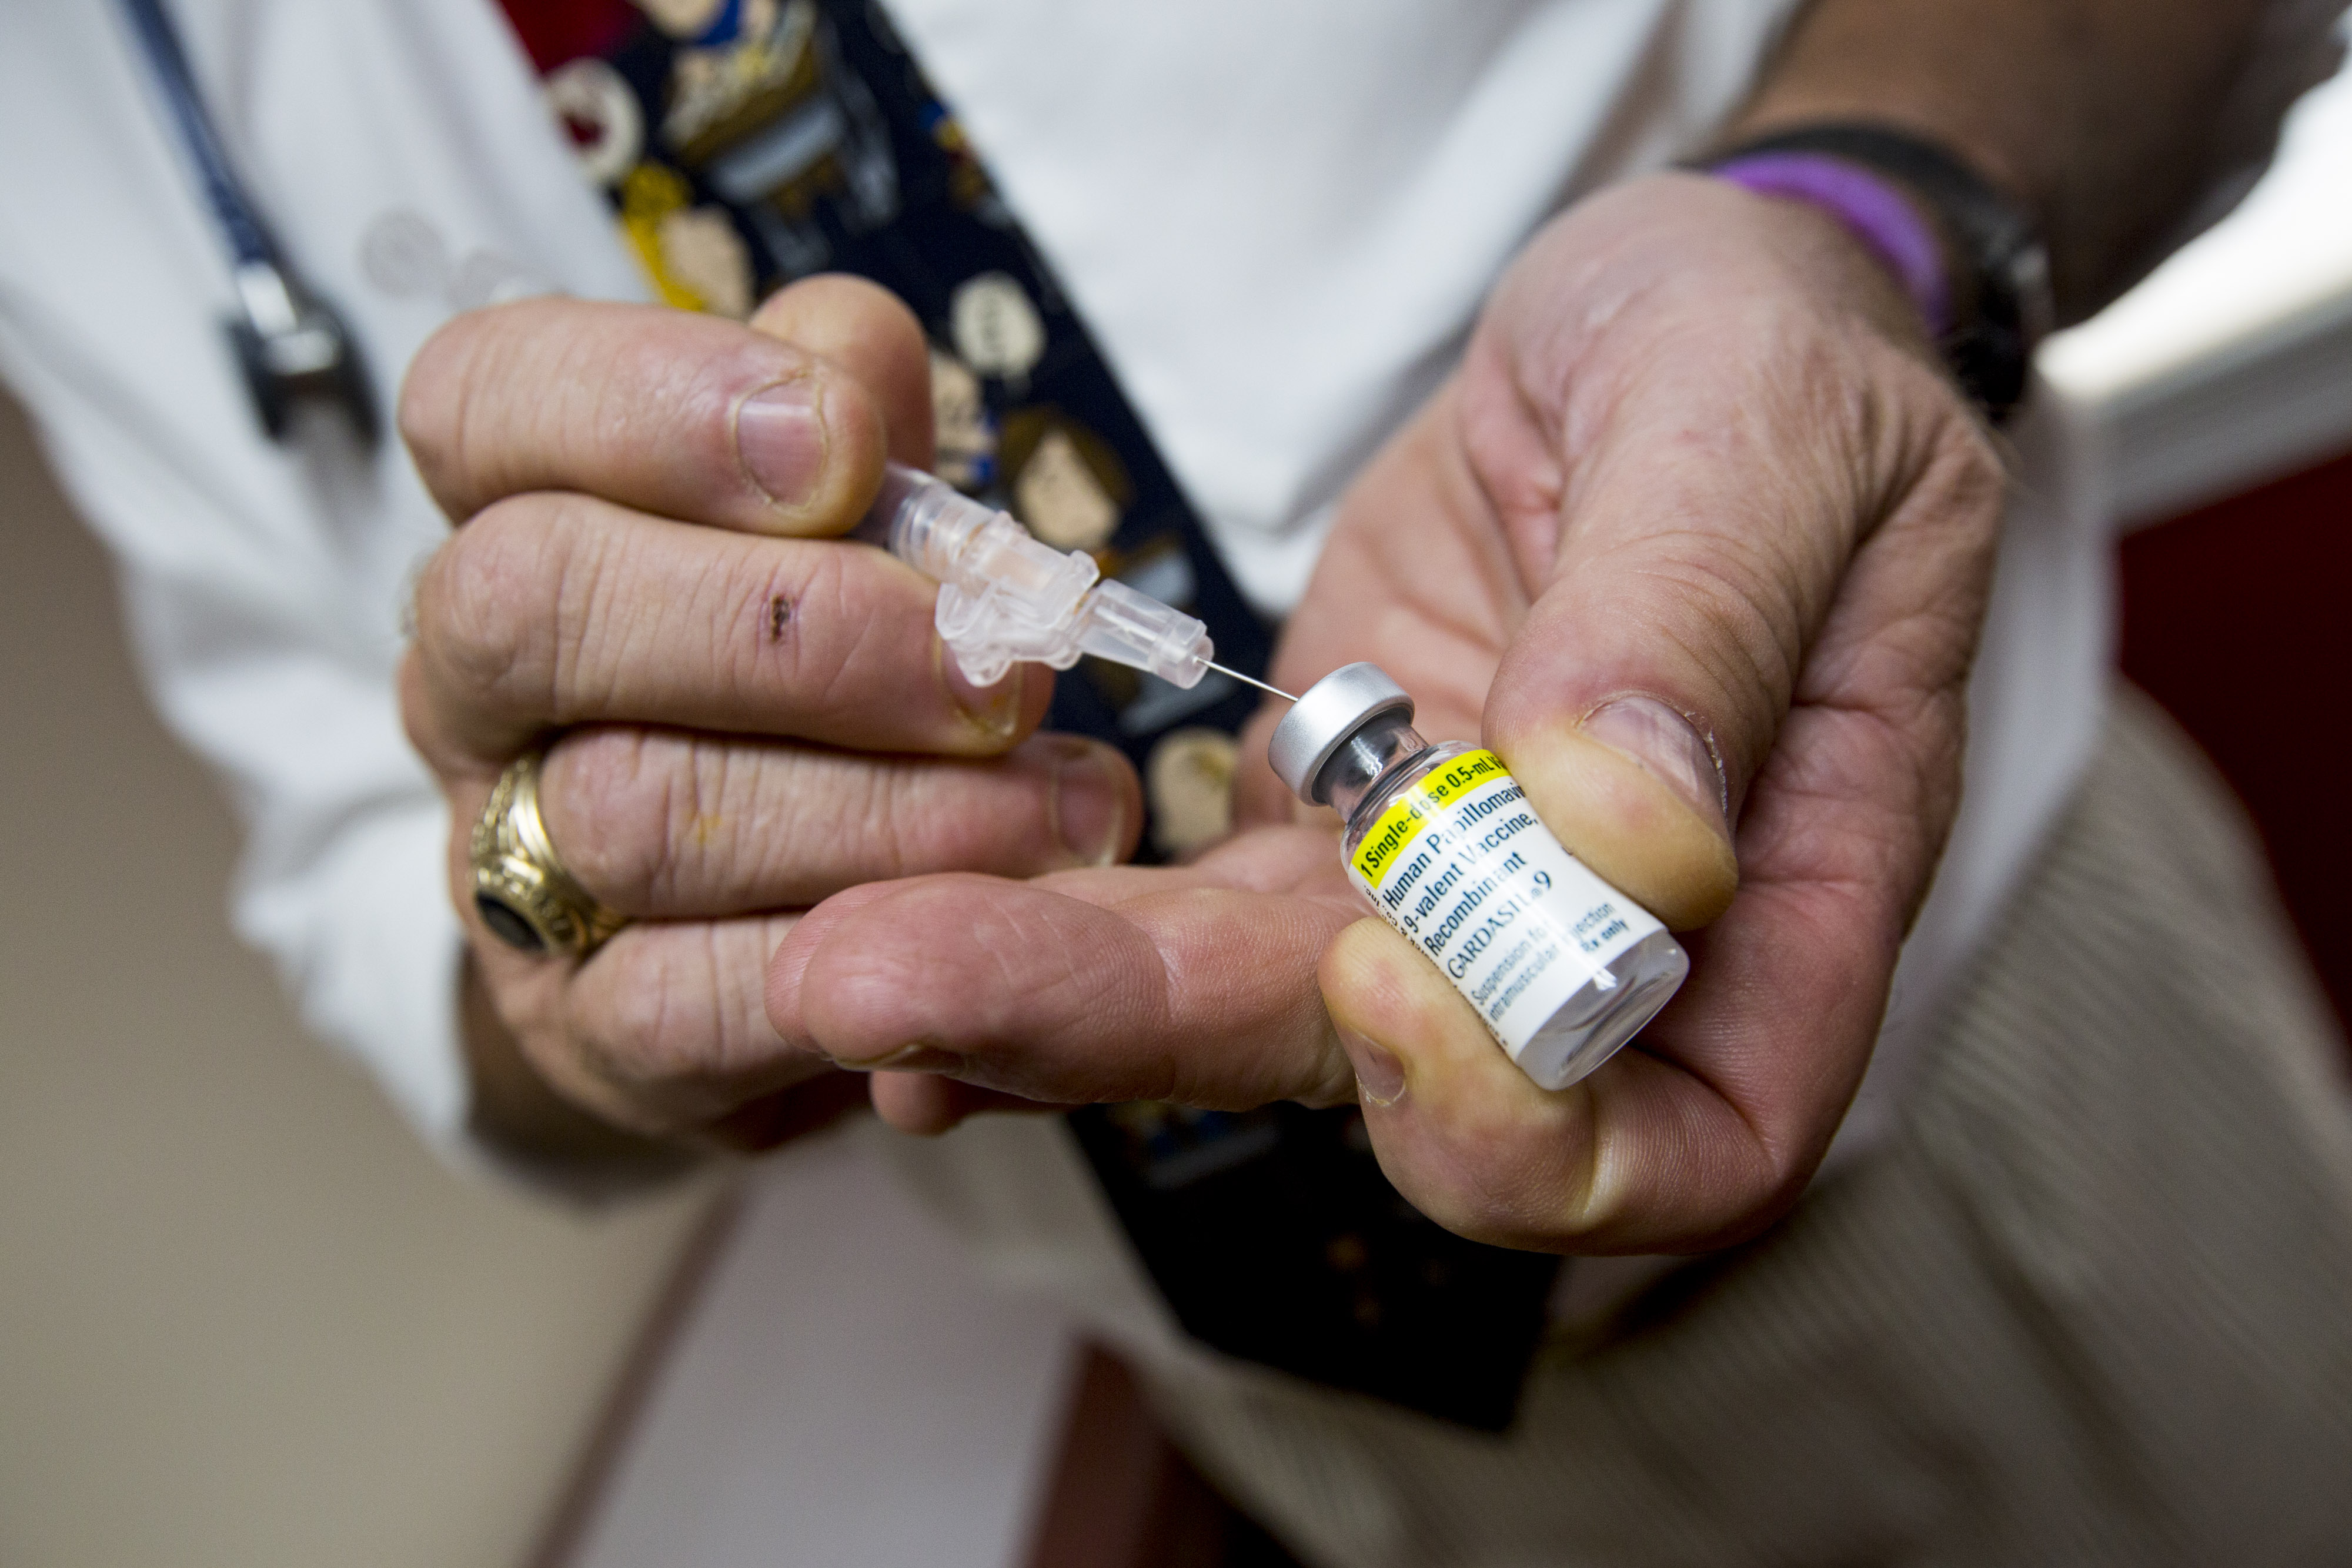 The HPV vaccine is drawn from a small vial into a syringe. 